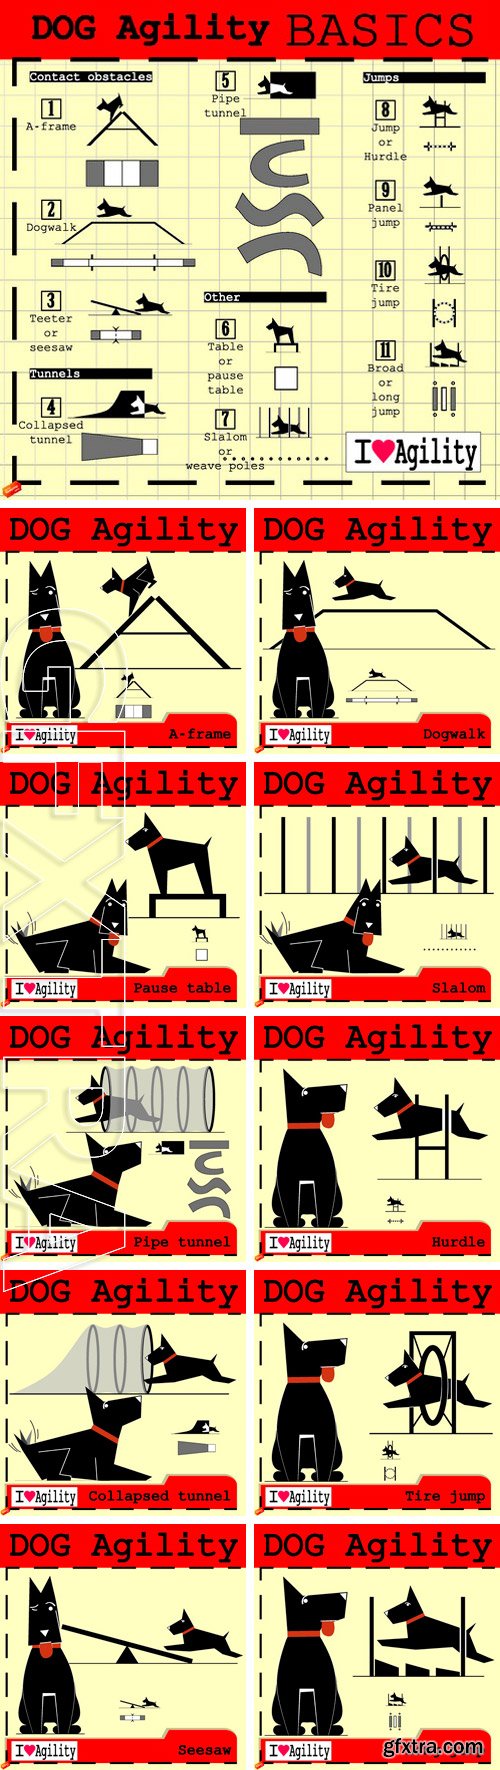 Stock Vectors -Dog Illustration - Listing of the basic obstacles, in training and agility competition